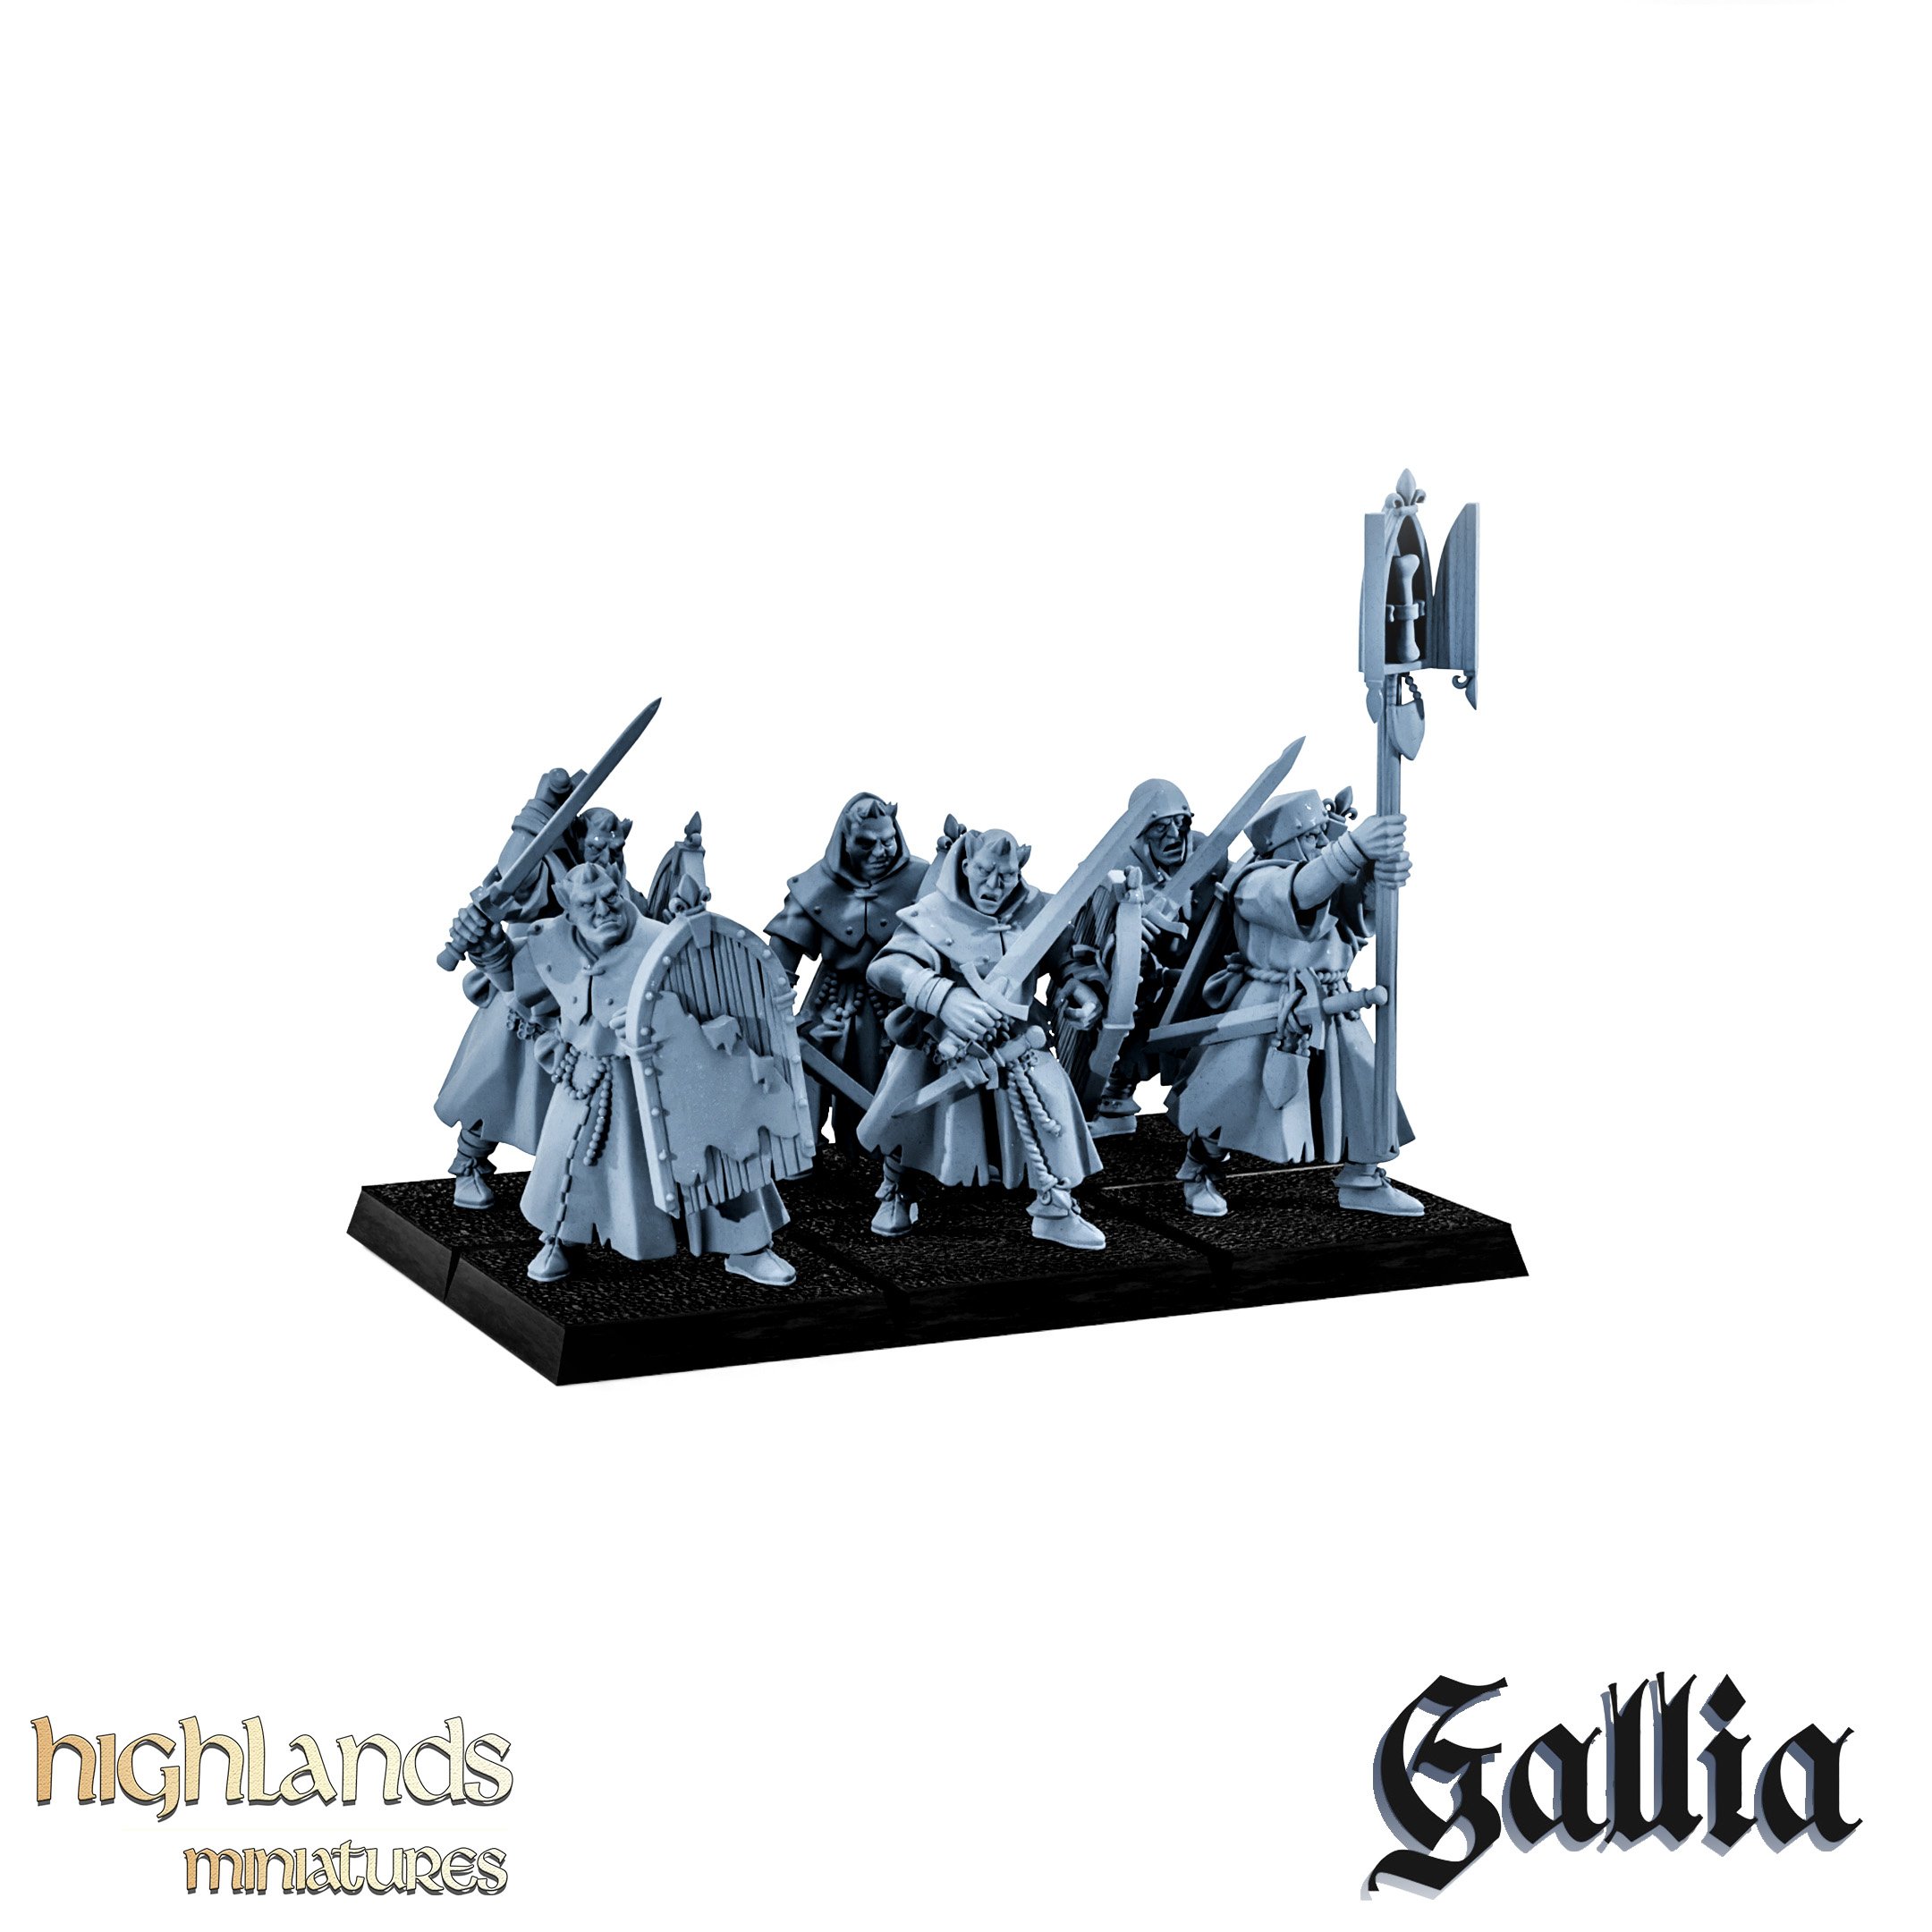 Grail Pilgrims fantasy wargaming miniatures designed by Highlands Miniatures 3D printed by Forgemaster Miniatures